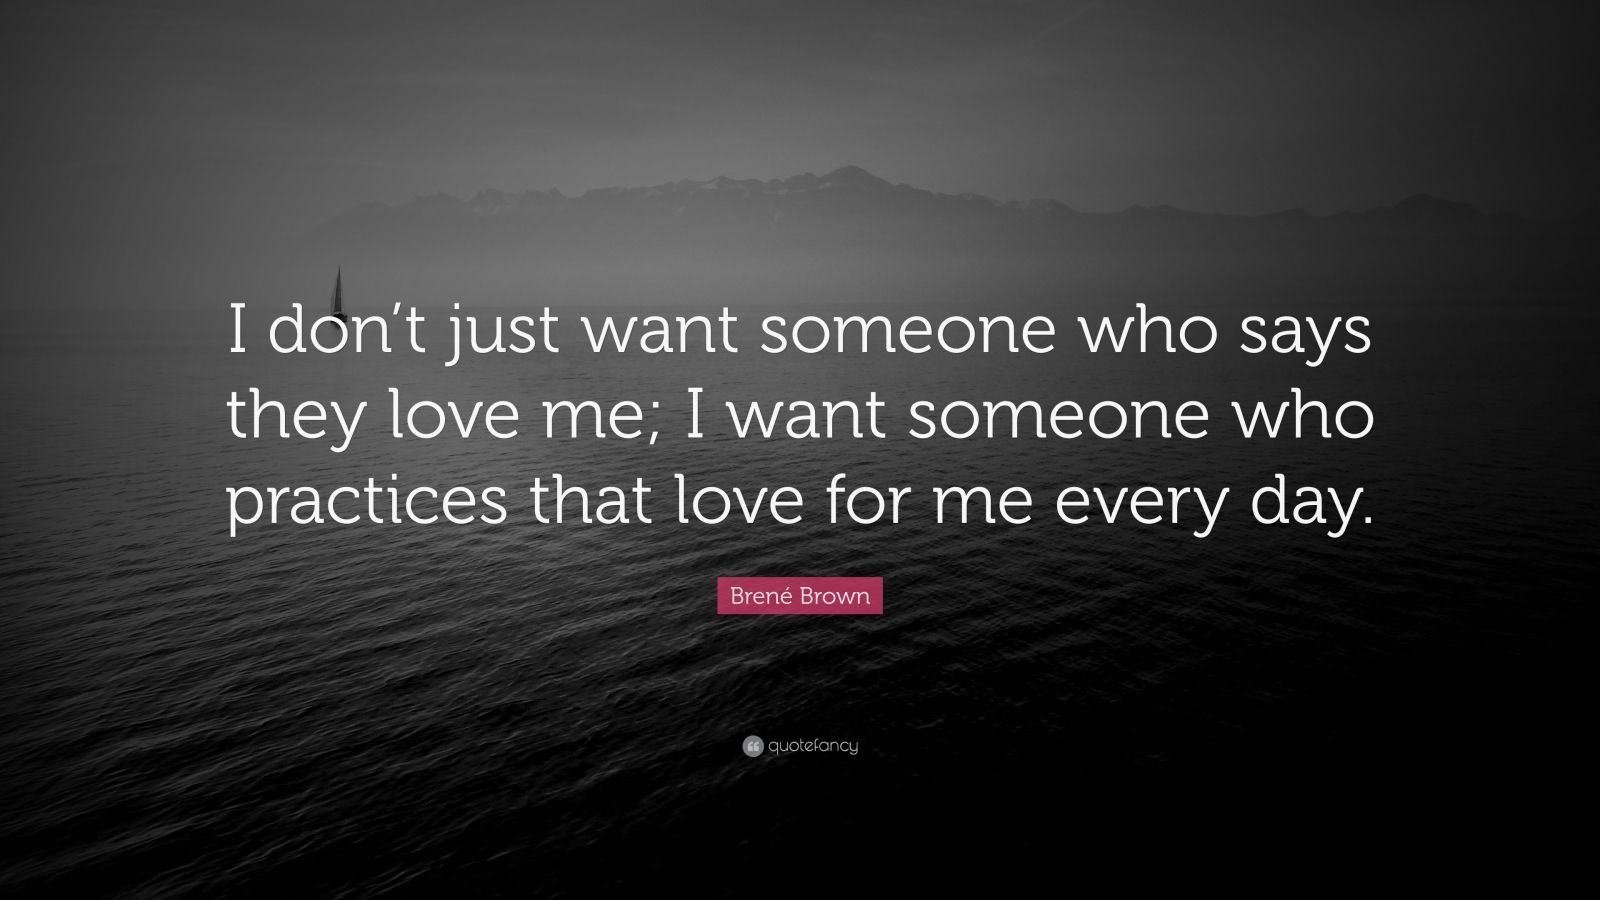 Brené Brown Quote: "I don't just want someone who says they love me; I want someone who ...